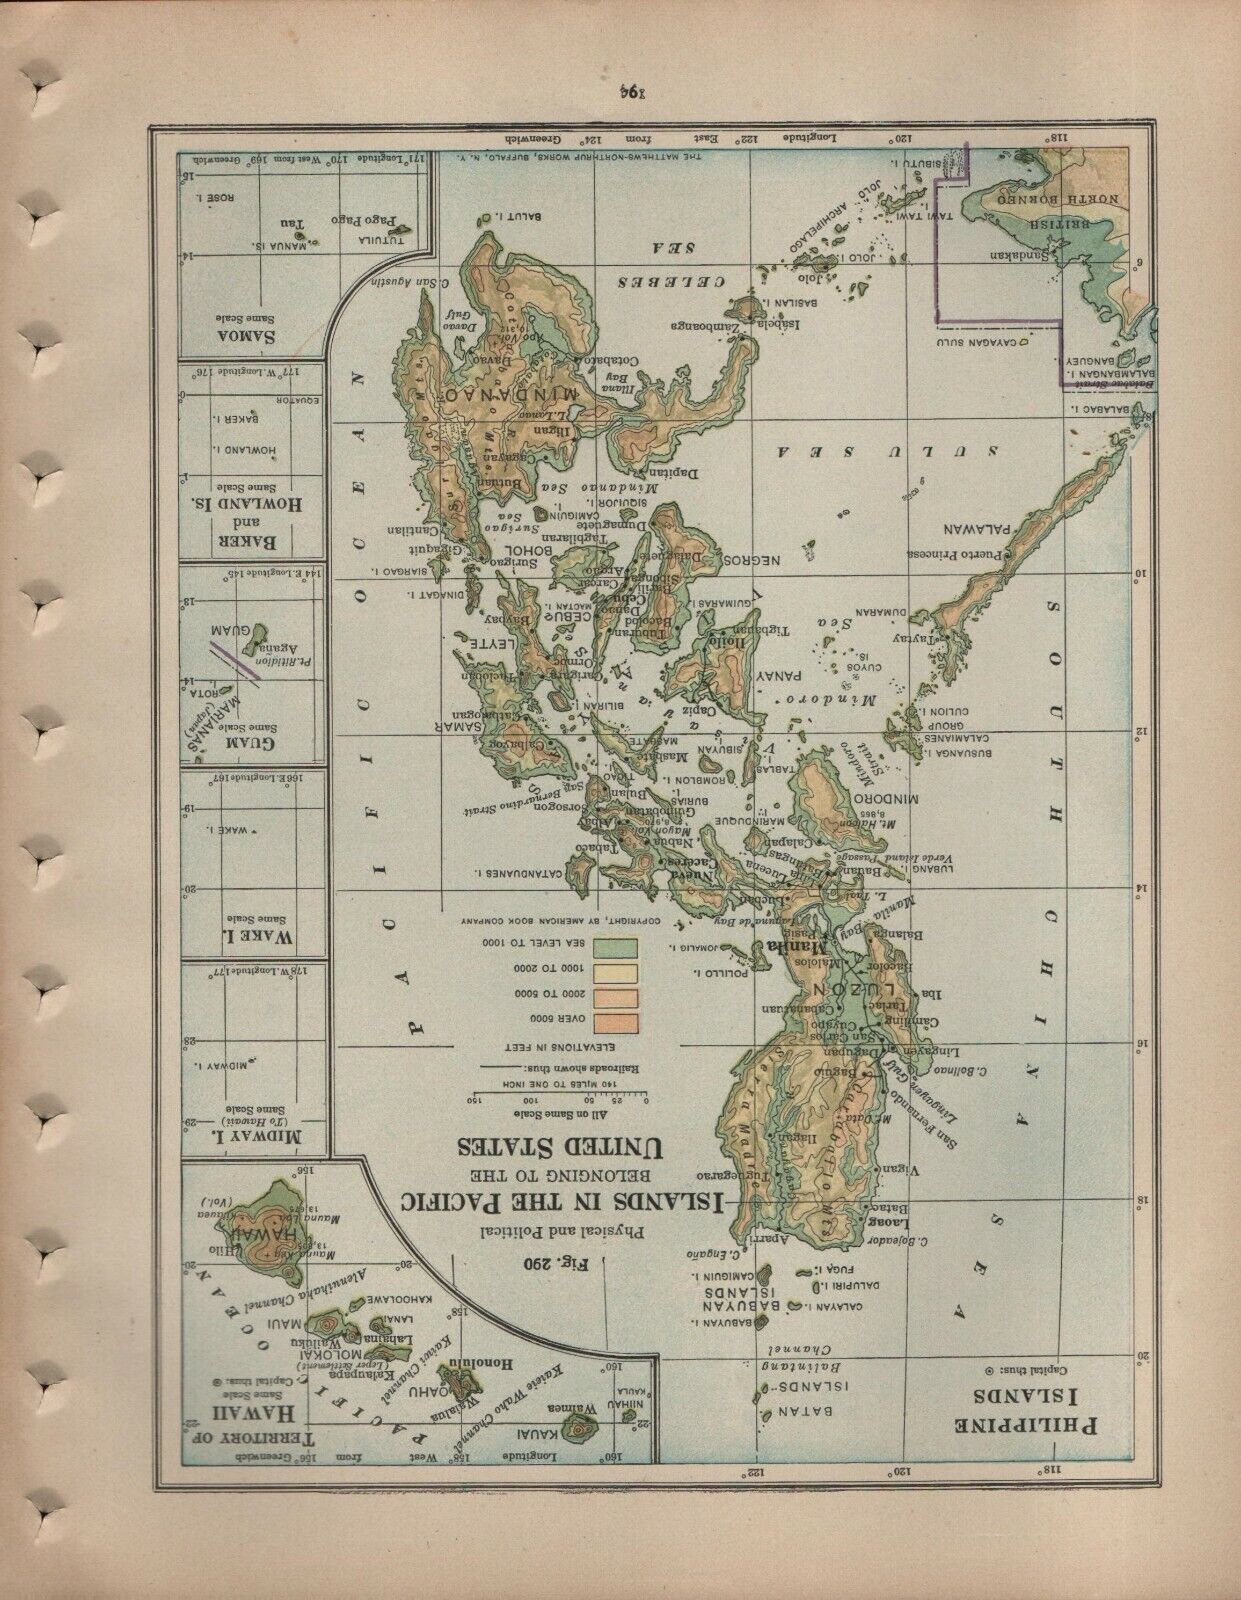 Islands in the Pacific belonging to the United States Map 1925